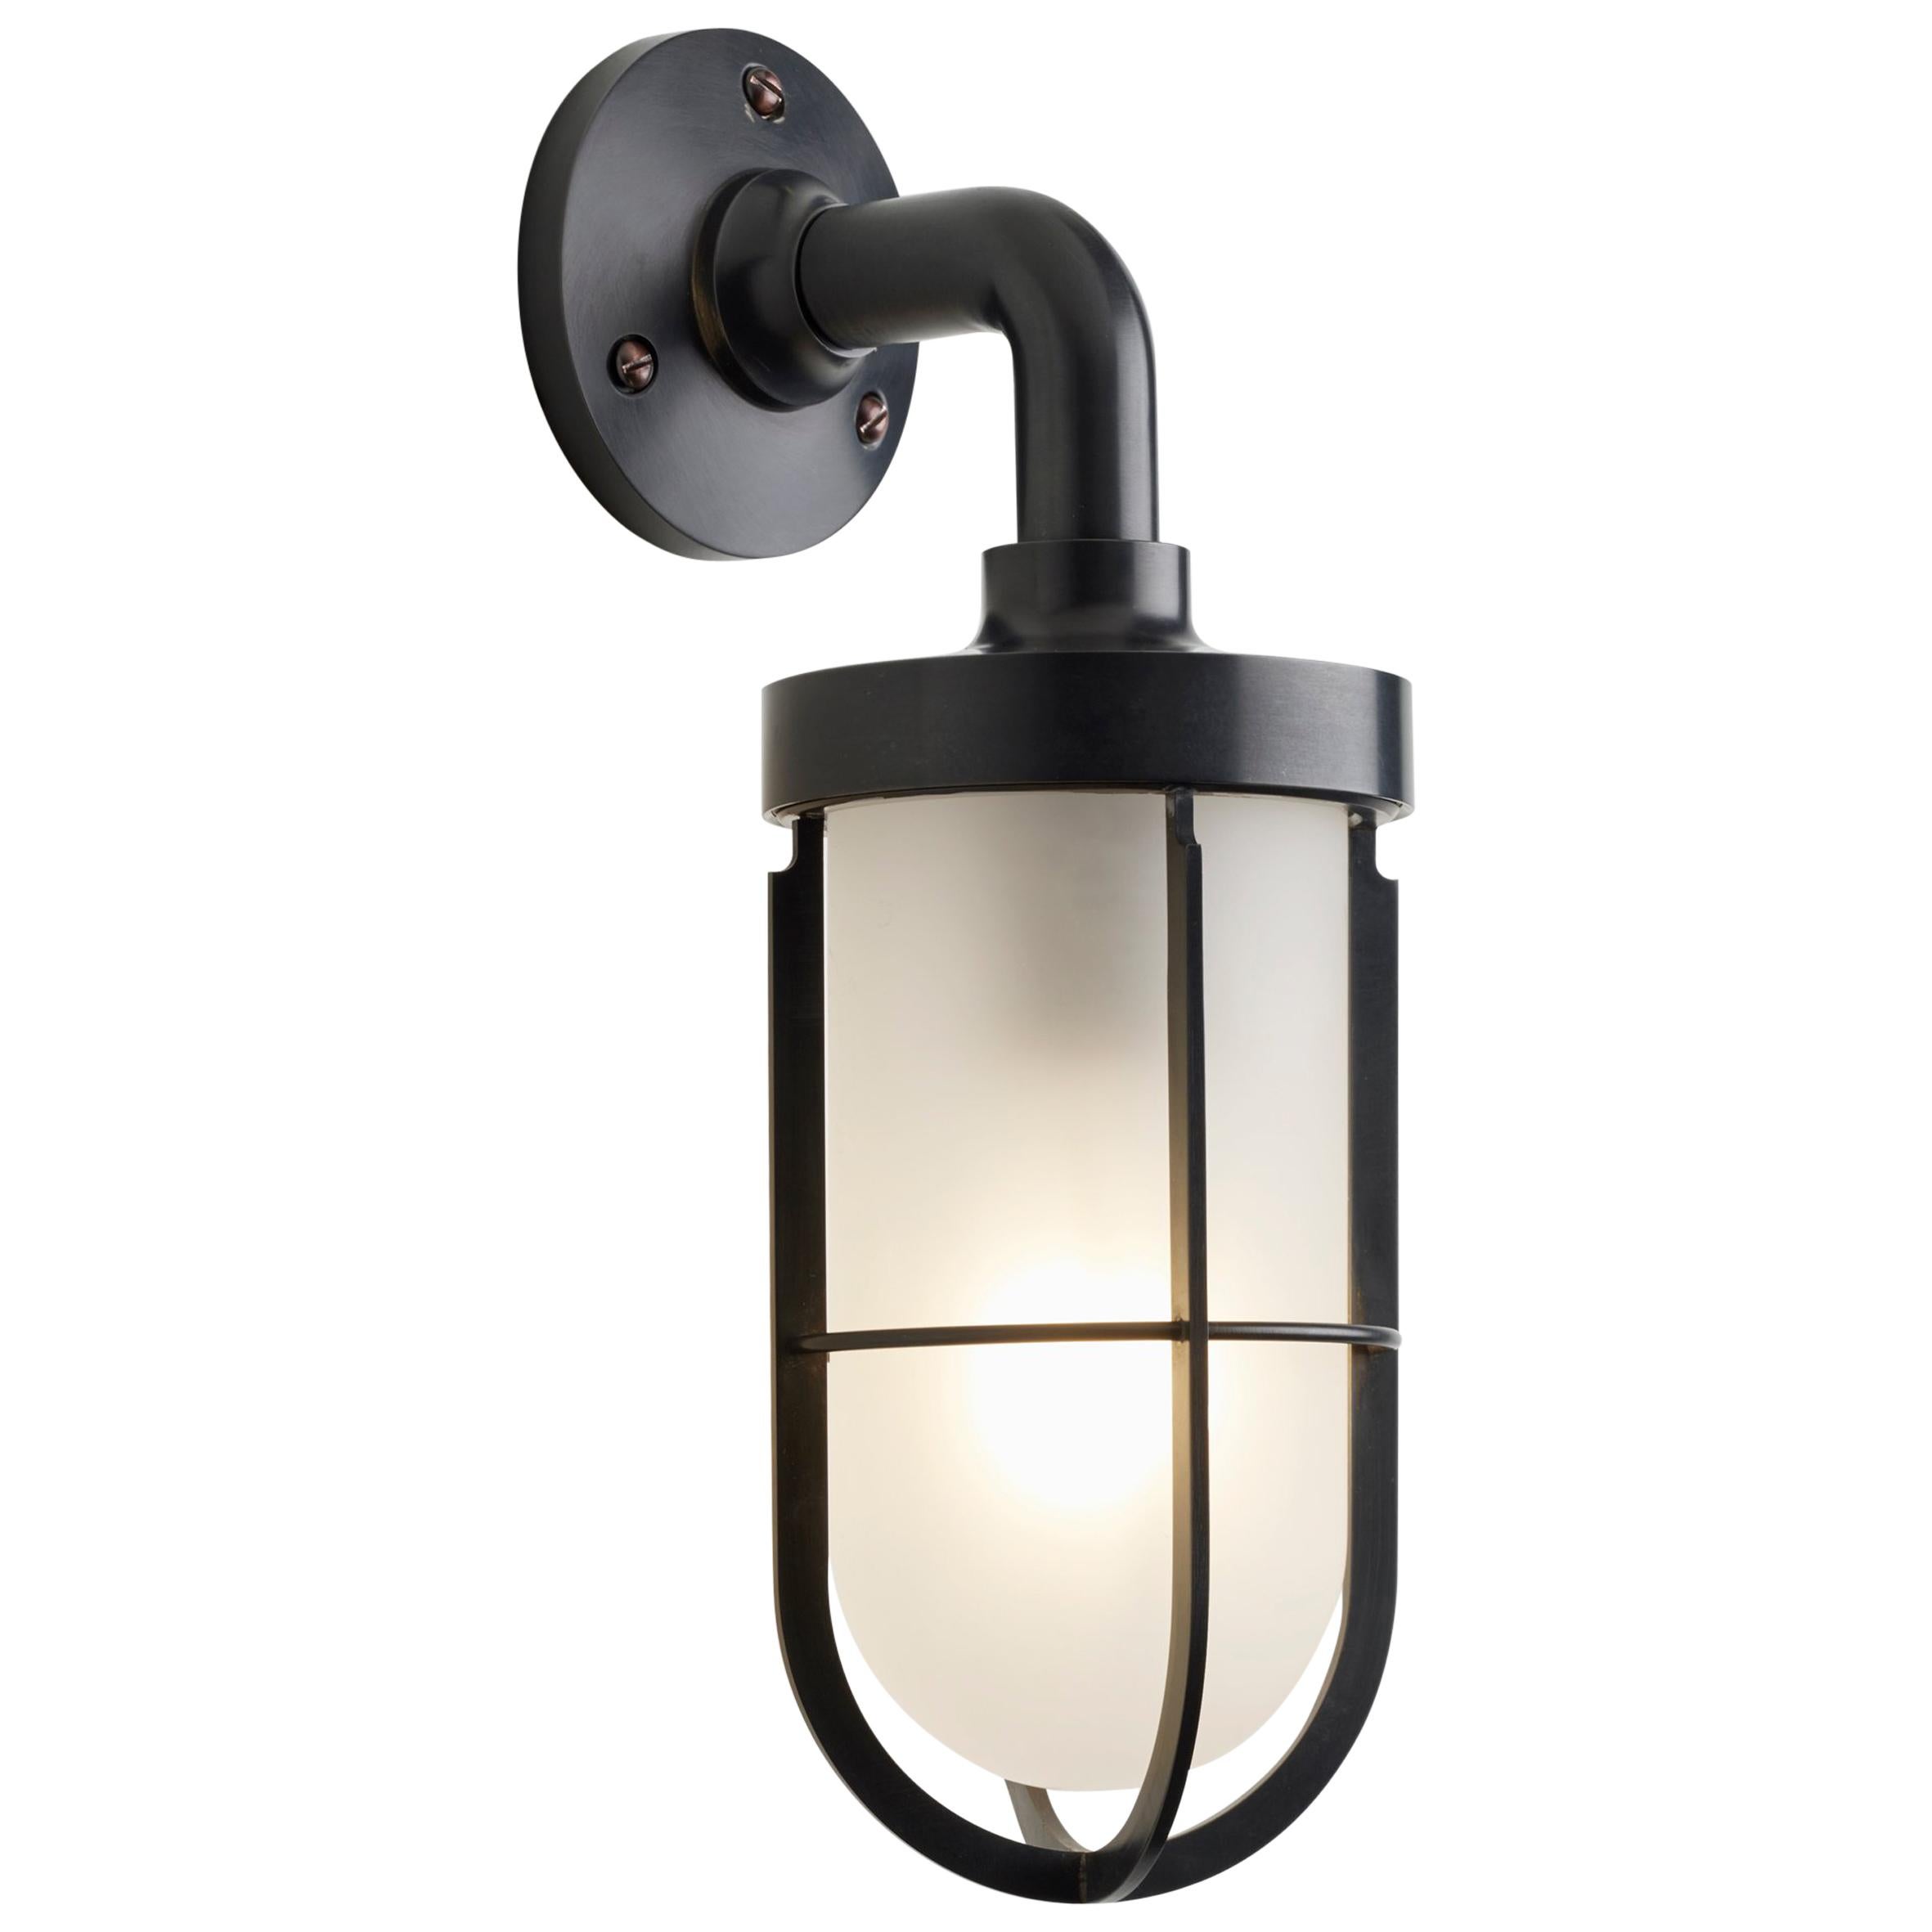 Tekna Docklight Wall Light with Dark Bronze Finish and Frosted Glass For Sale